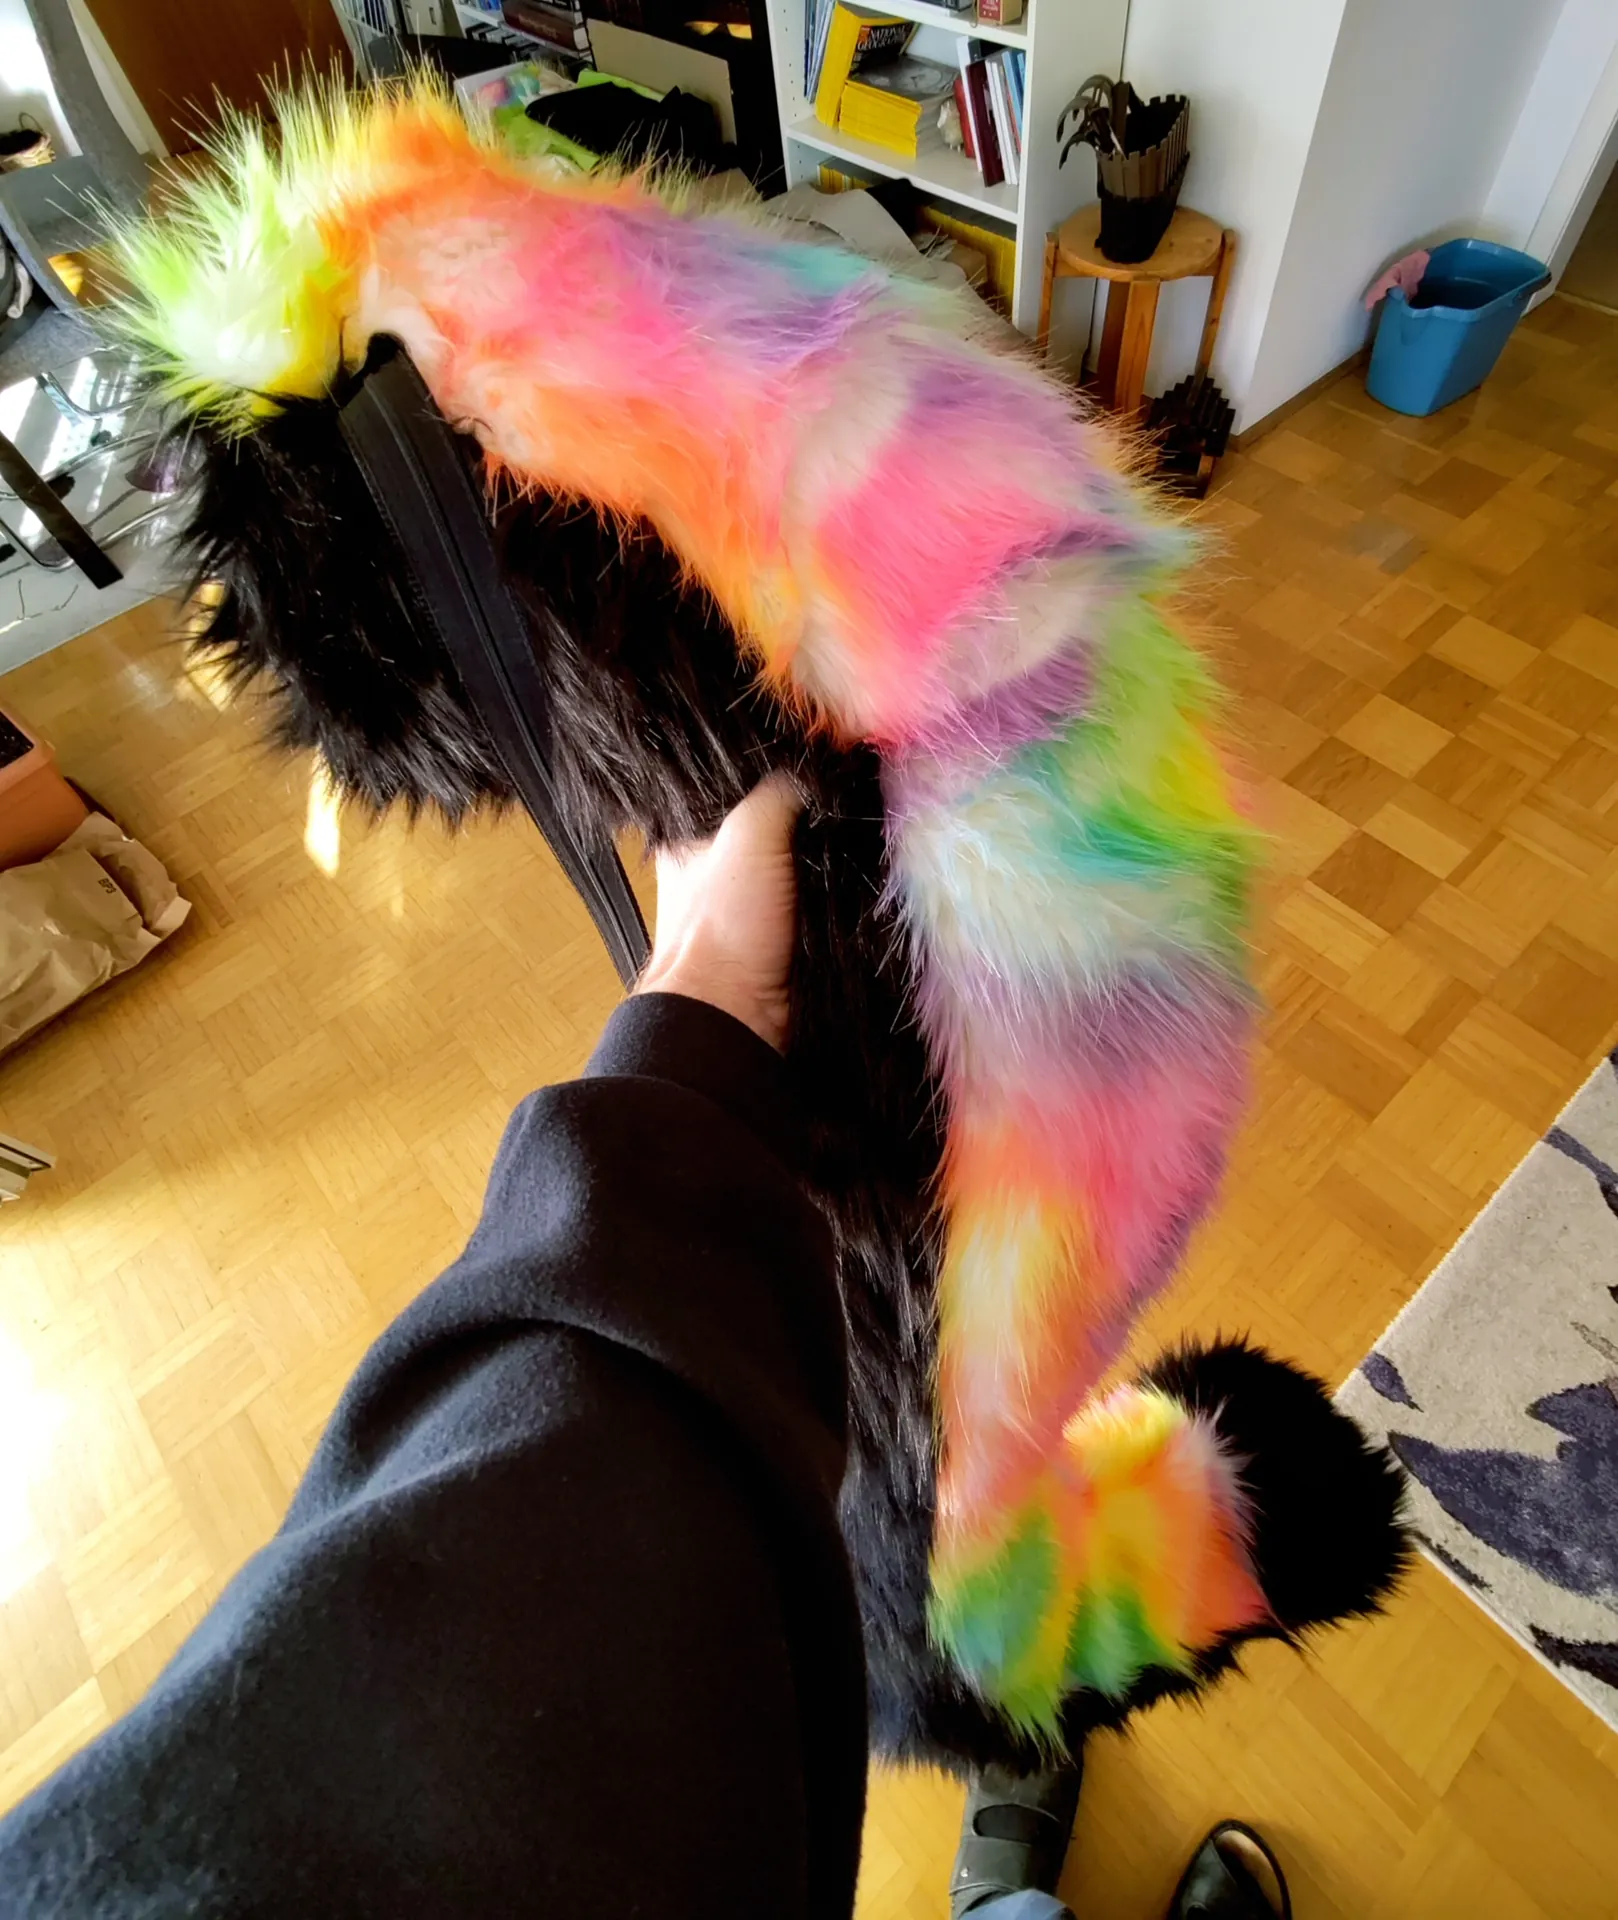 Me holding the finished tail. Ignore the chaos in the room! There is a black belt attached to it already.